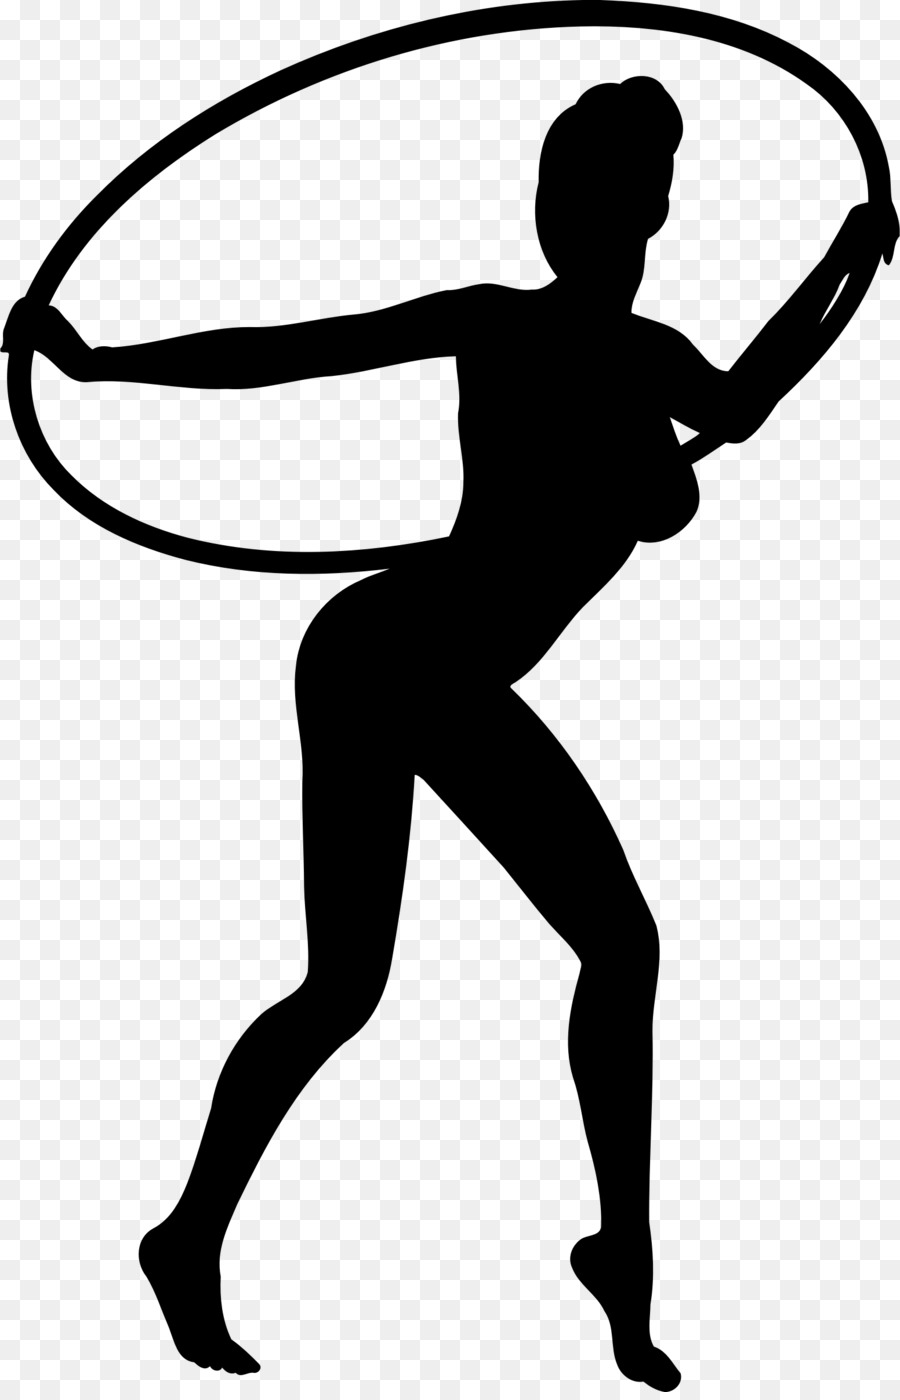 Silhouette Hula Hoops Dance Clip art - gymnastics png download - 1552*2400 - Free Transparent Silhouette png Download.